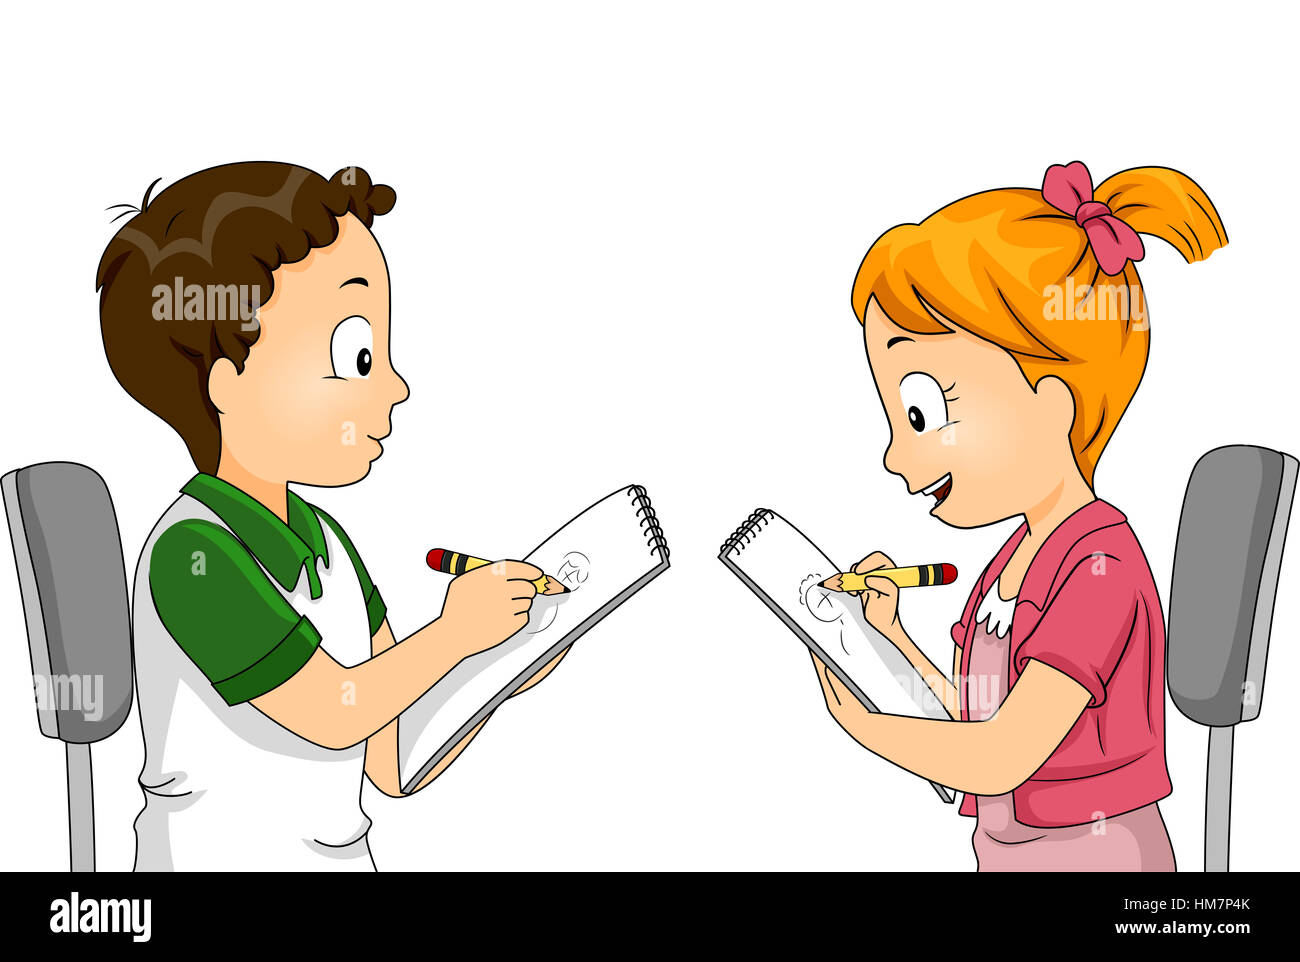 Illustration of Children Drawing Each Other Stock Photo